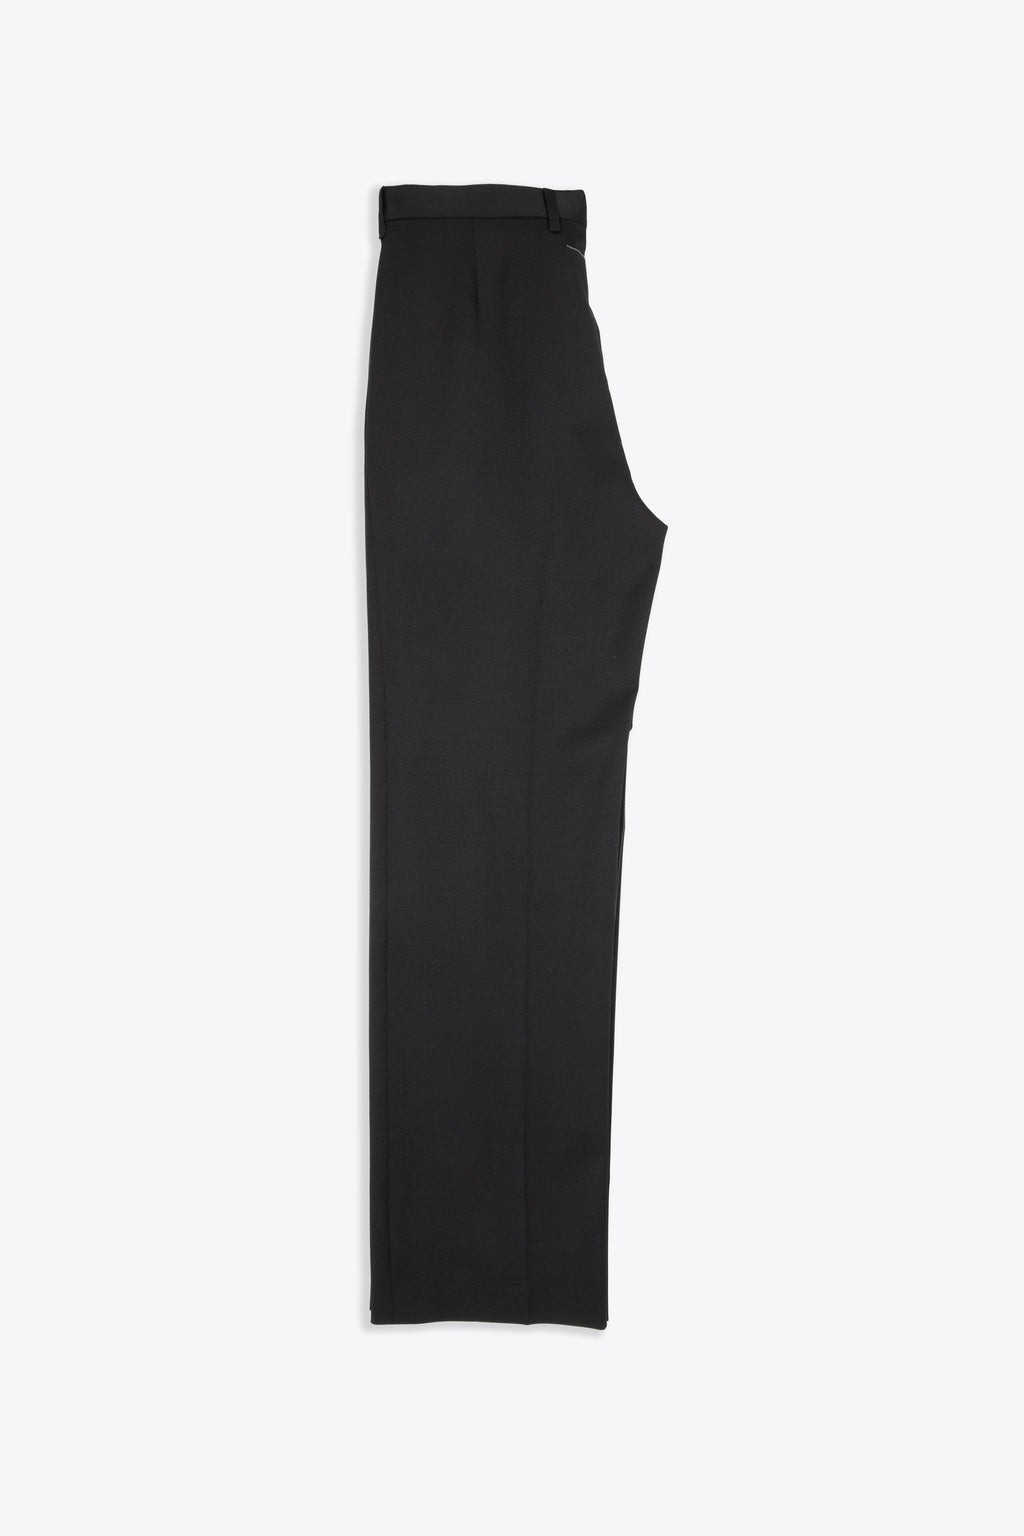 alt-image__Black-tailored-pant-with-pinstriped-single-leg-